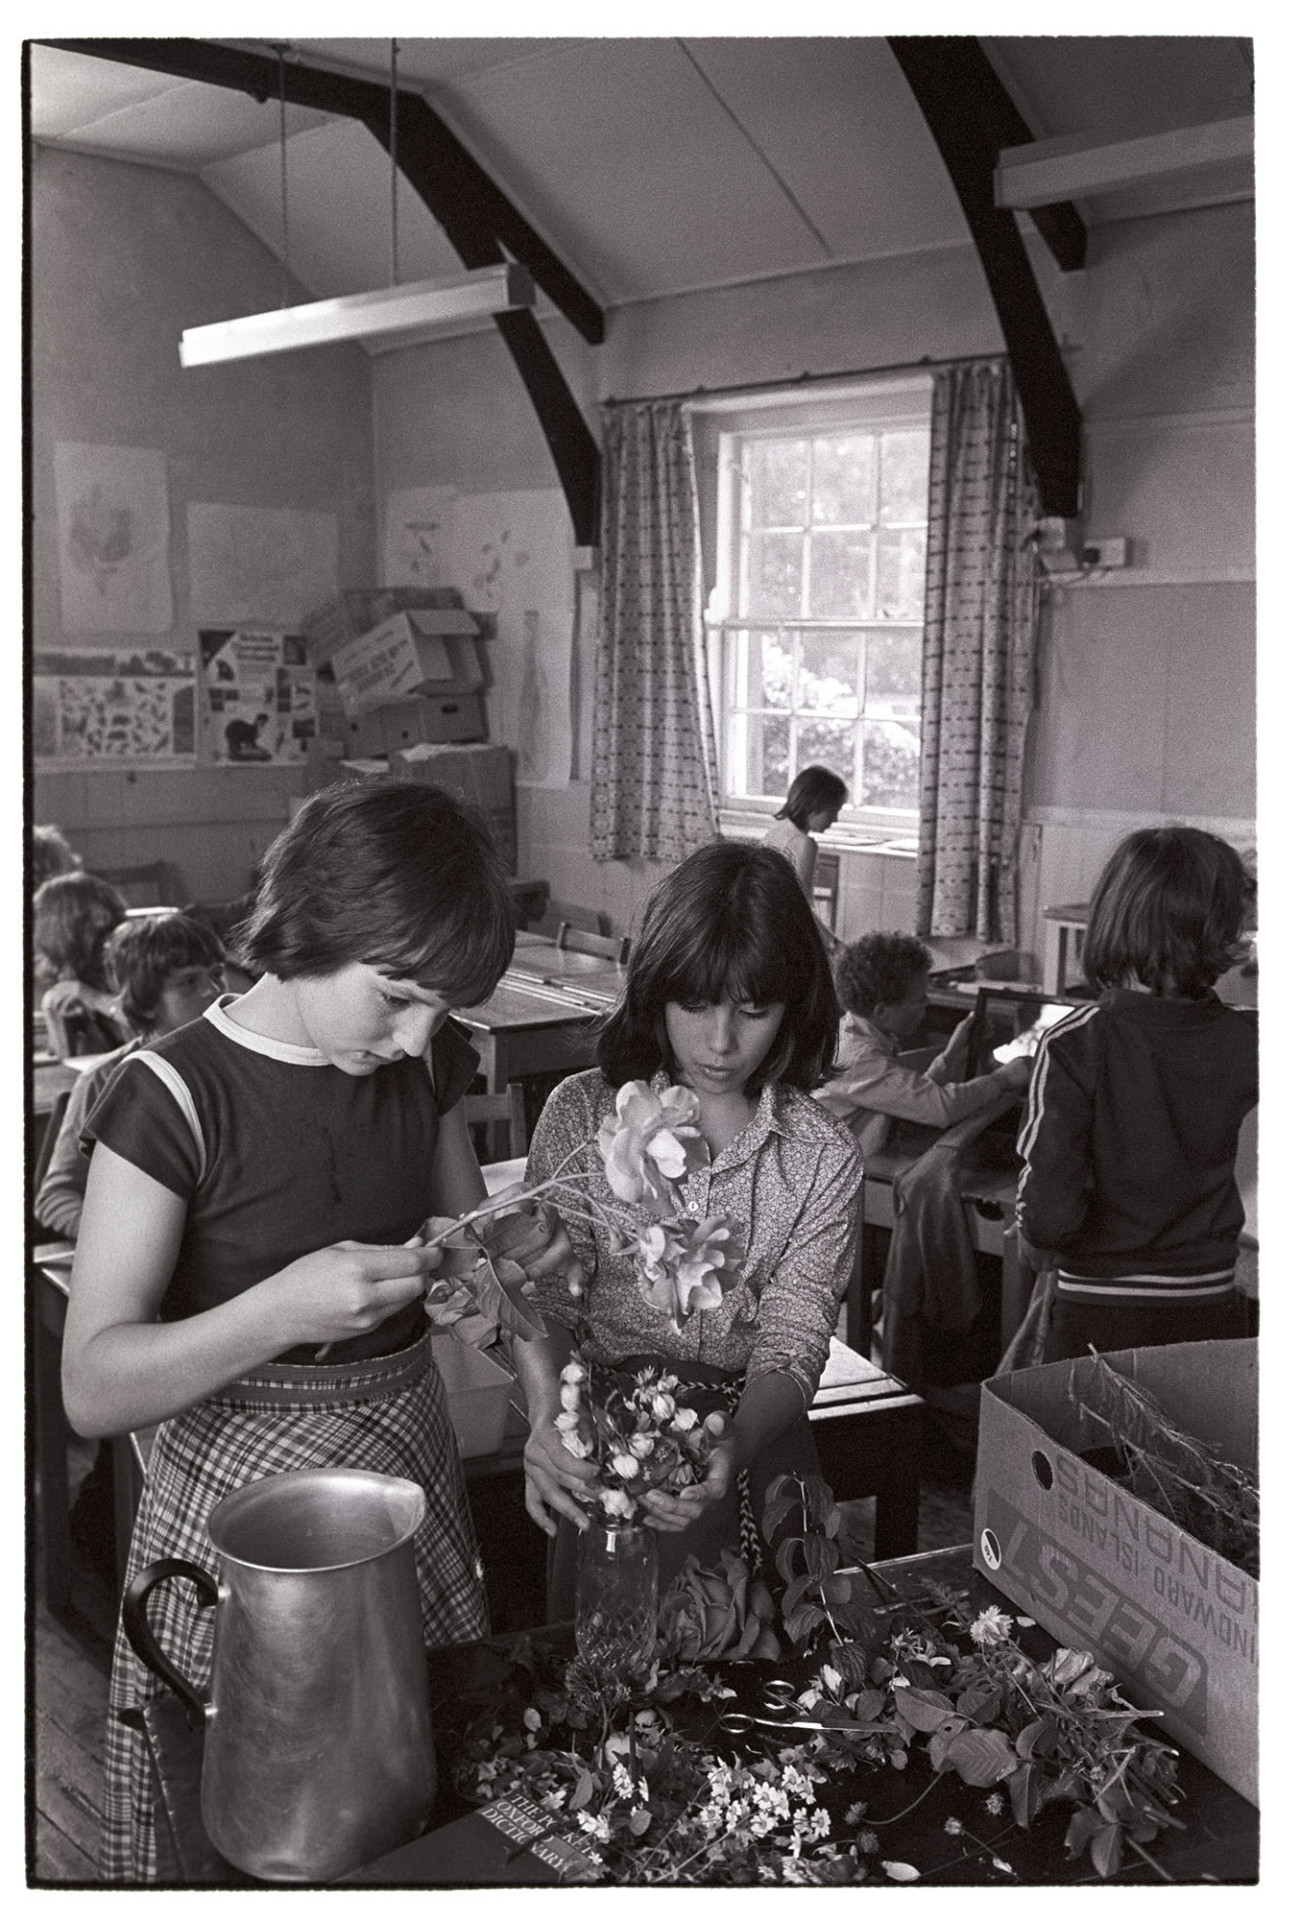 Children in class, arranging flowers.
[Two girls in a classroom arranging flowers at Blue Coats School, Torrington. Other children are working in the background.]